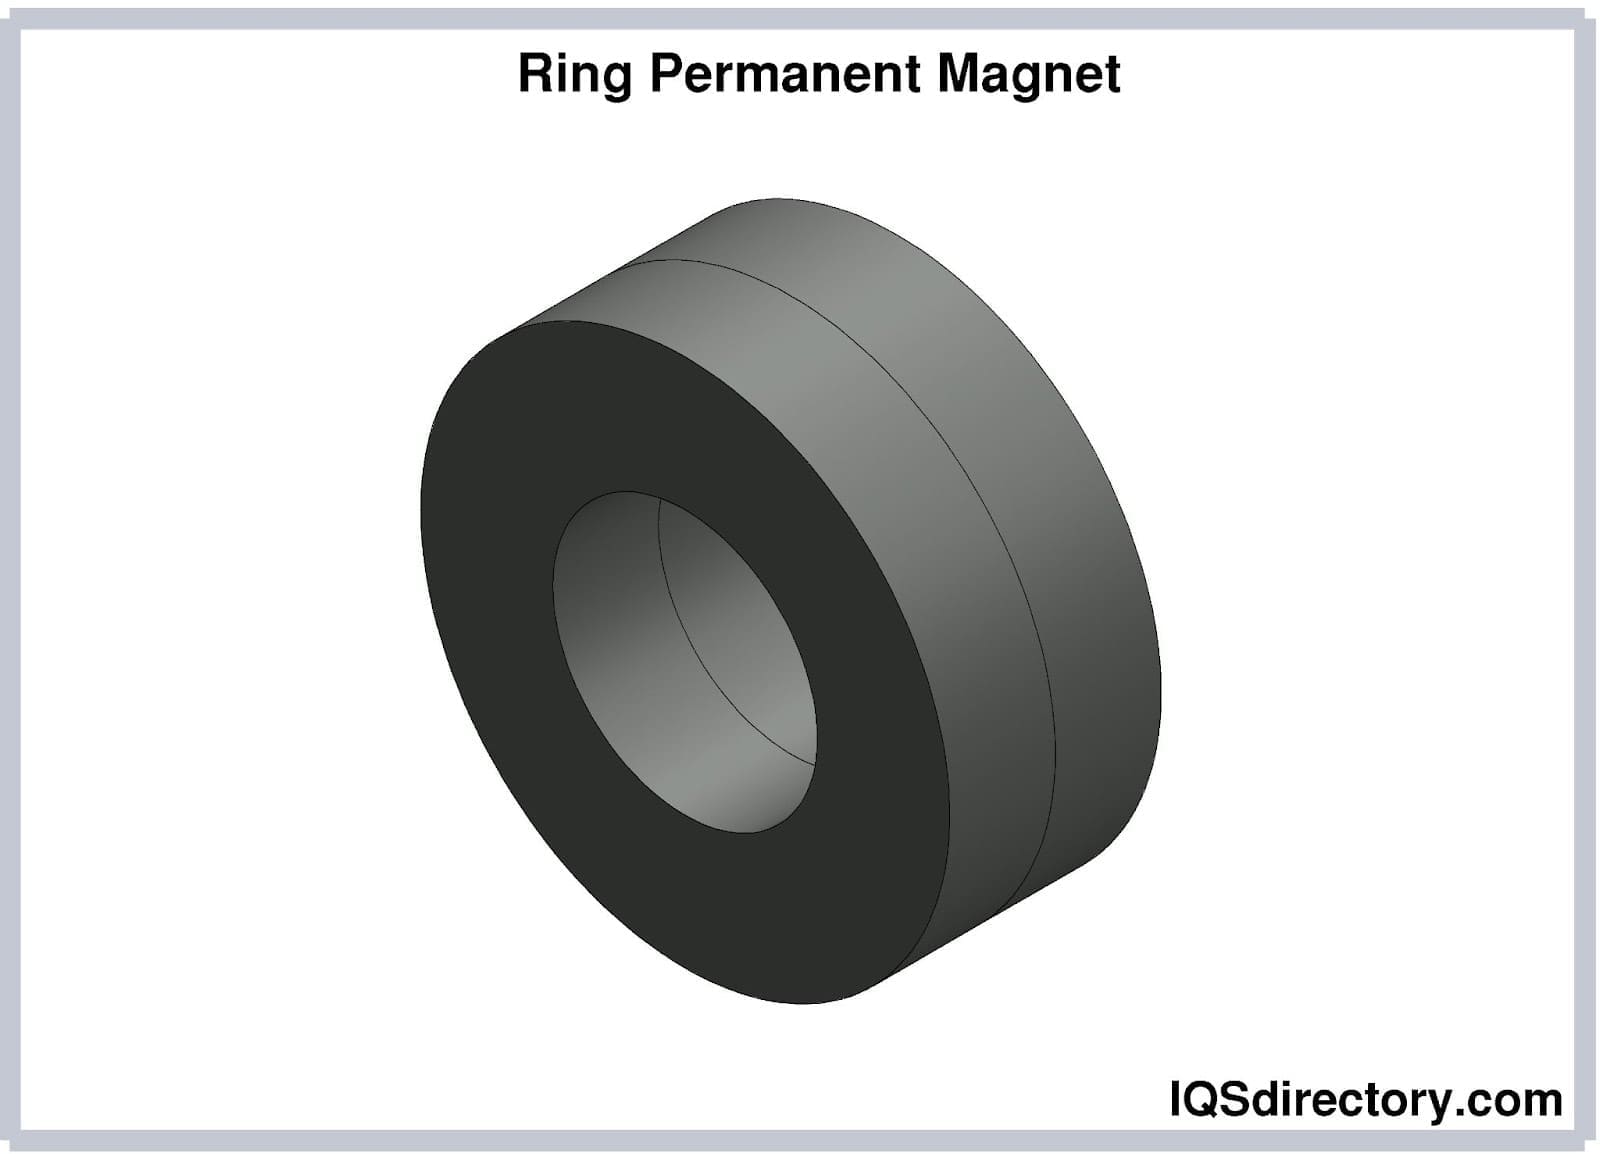 Magnets: Types, Applications, Manufacturing, and Magnetizing Process